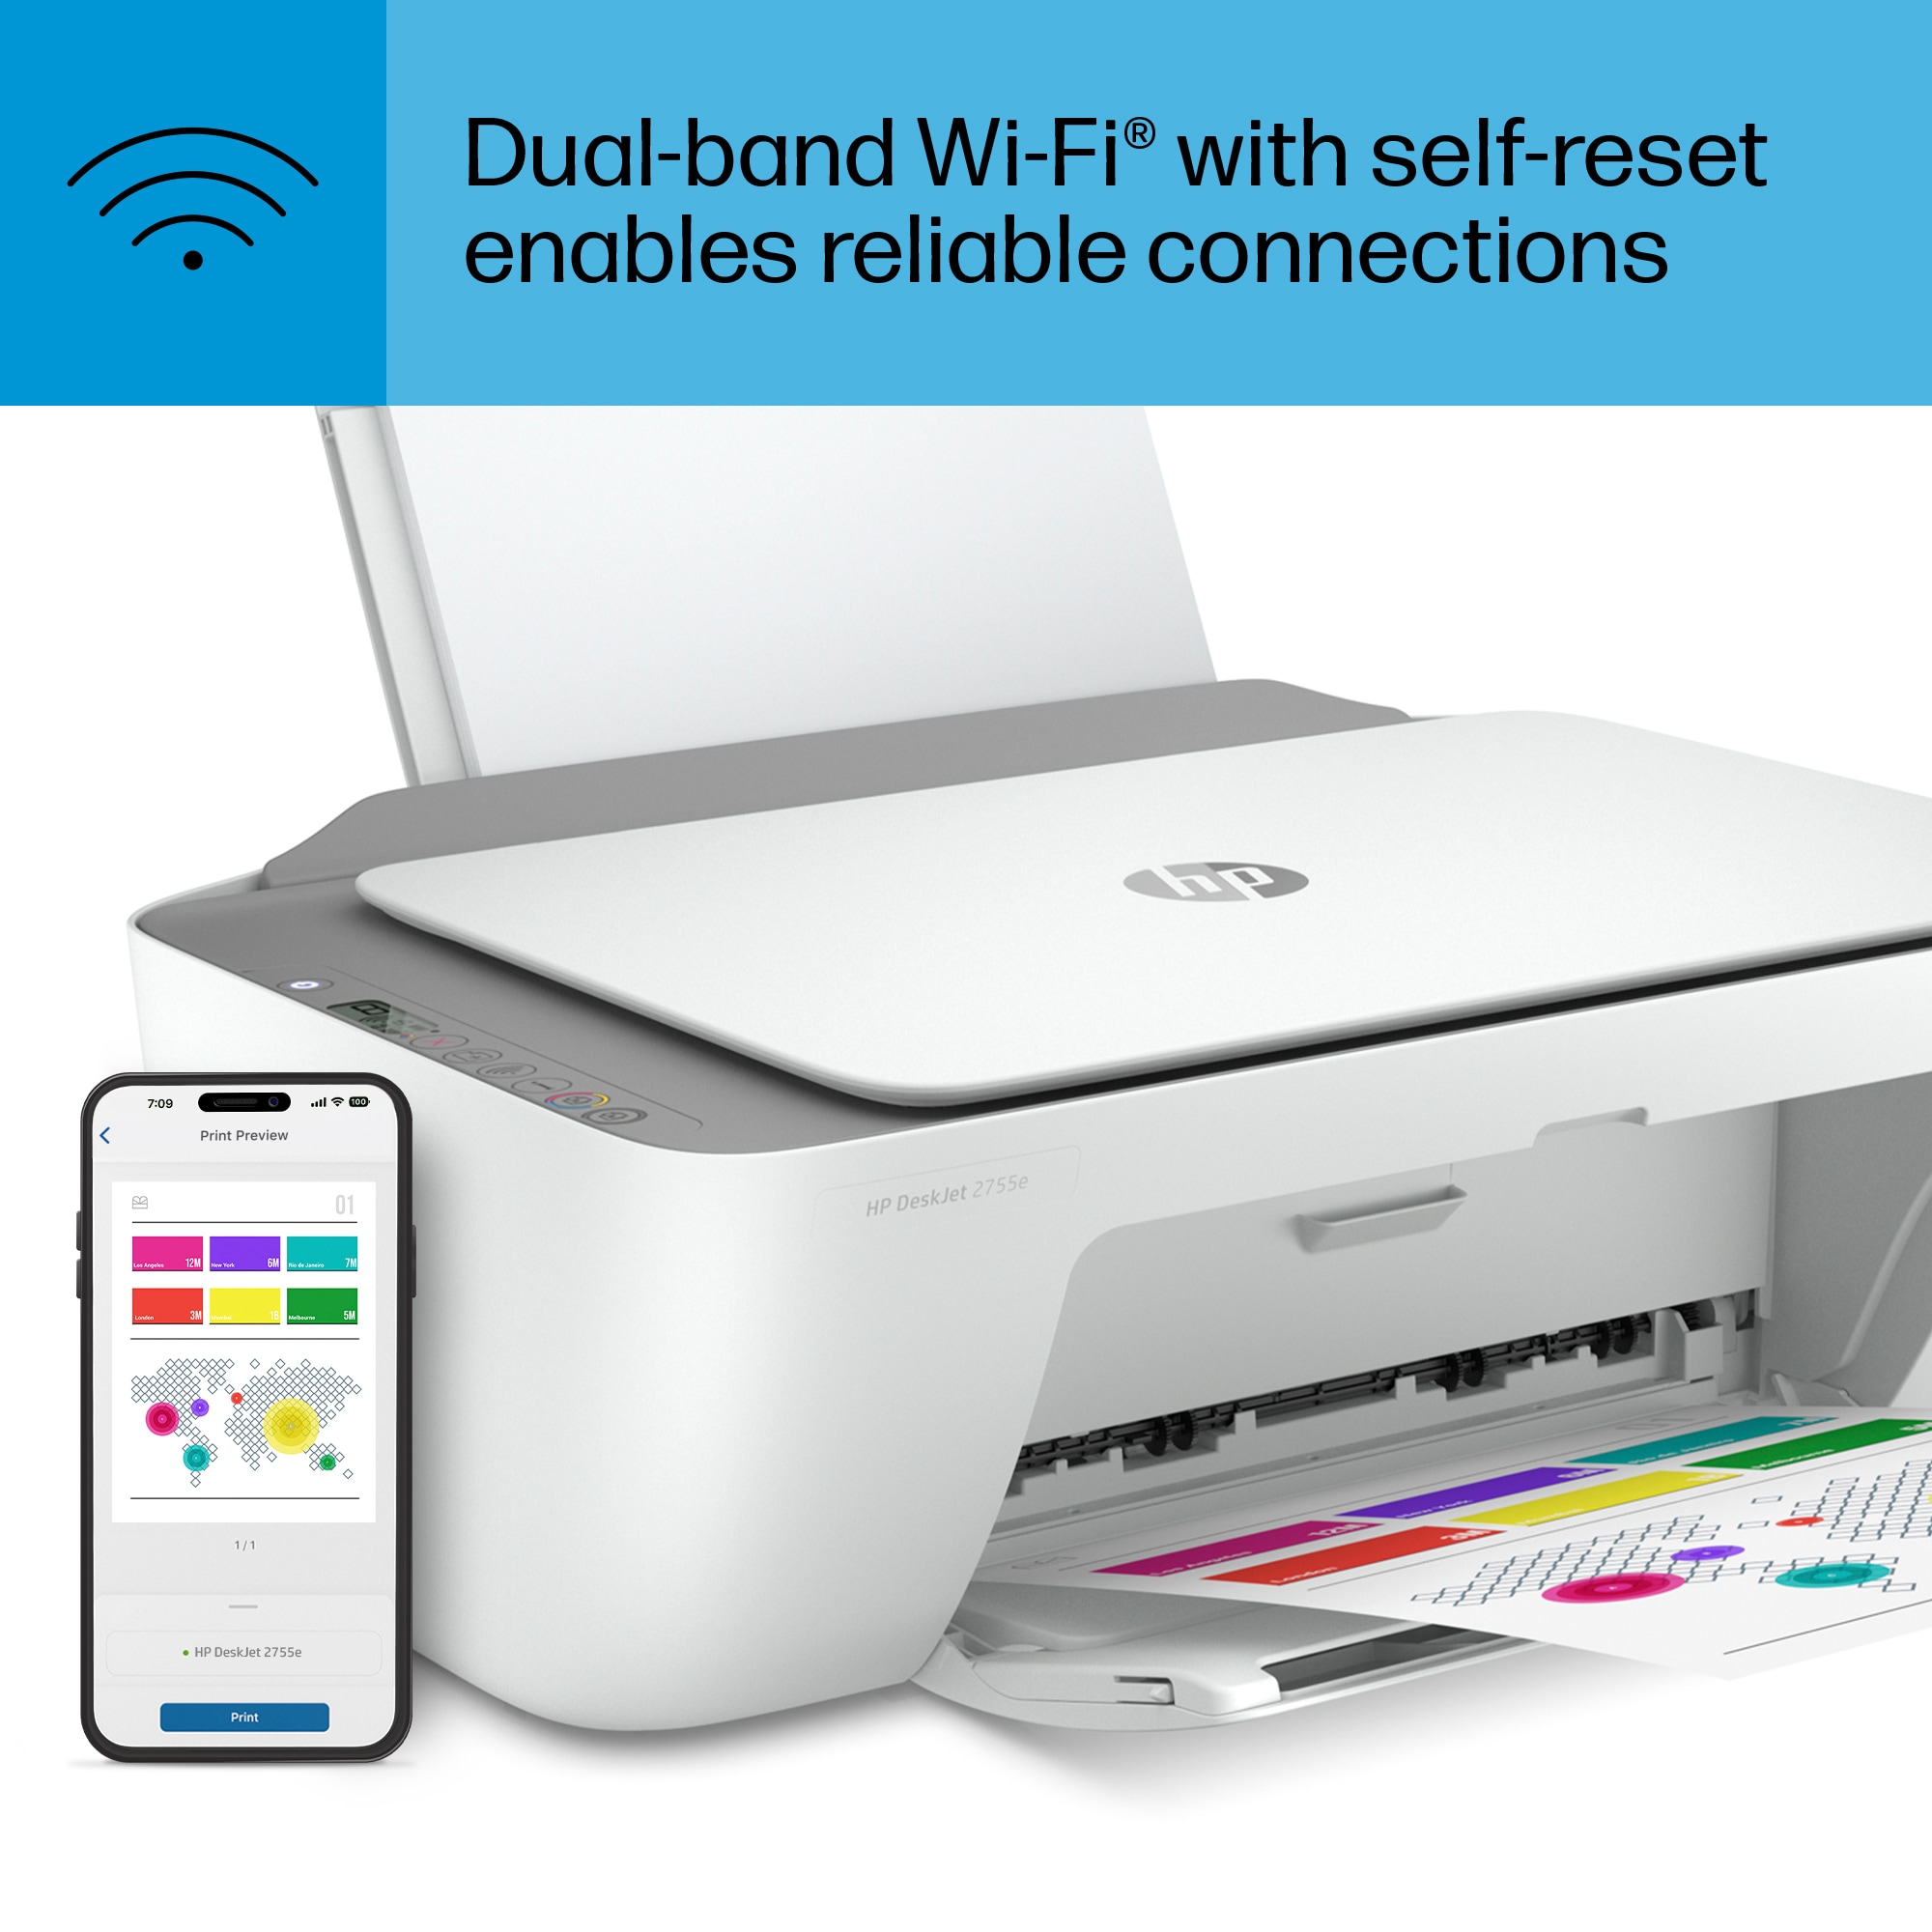 HP DeskJet 2755e Wireless All-In-One Color Printer, Scanner, Copier with  Instant Ink and HP+ (26K67)